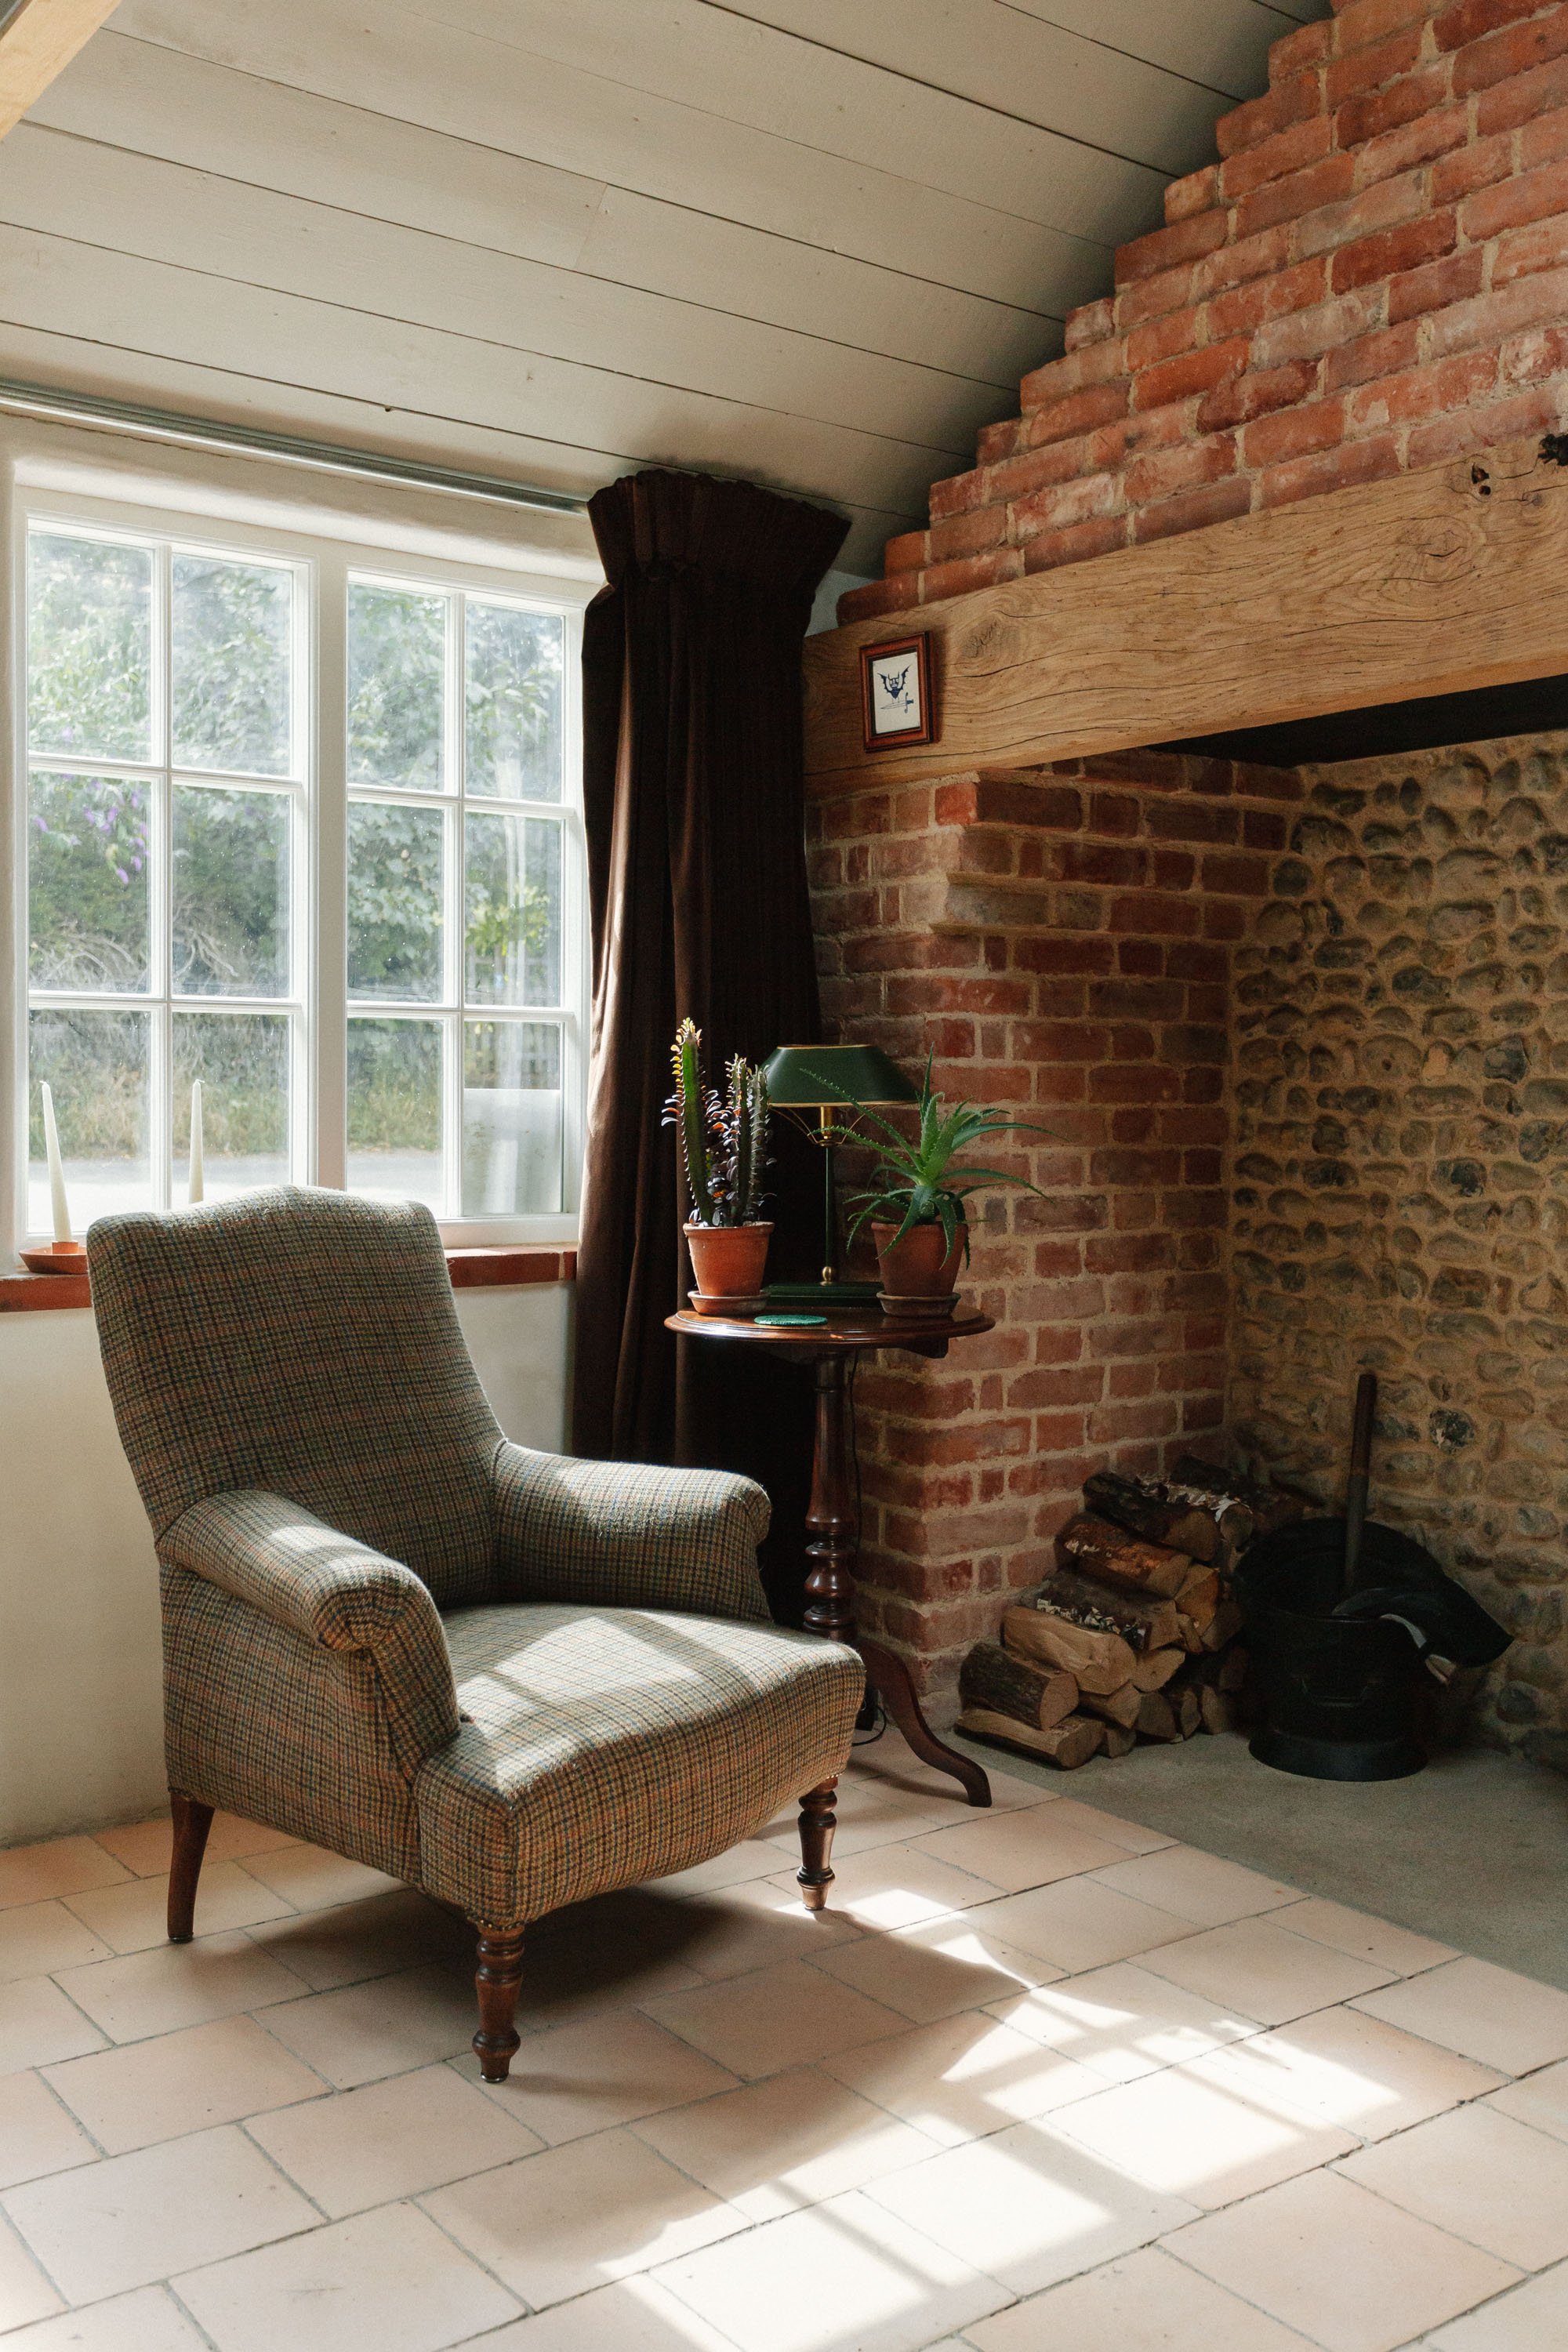 traditional style armchair next to brick fireplace